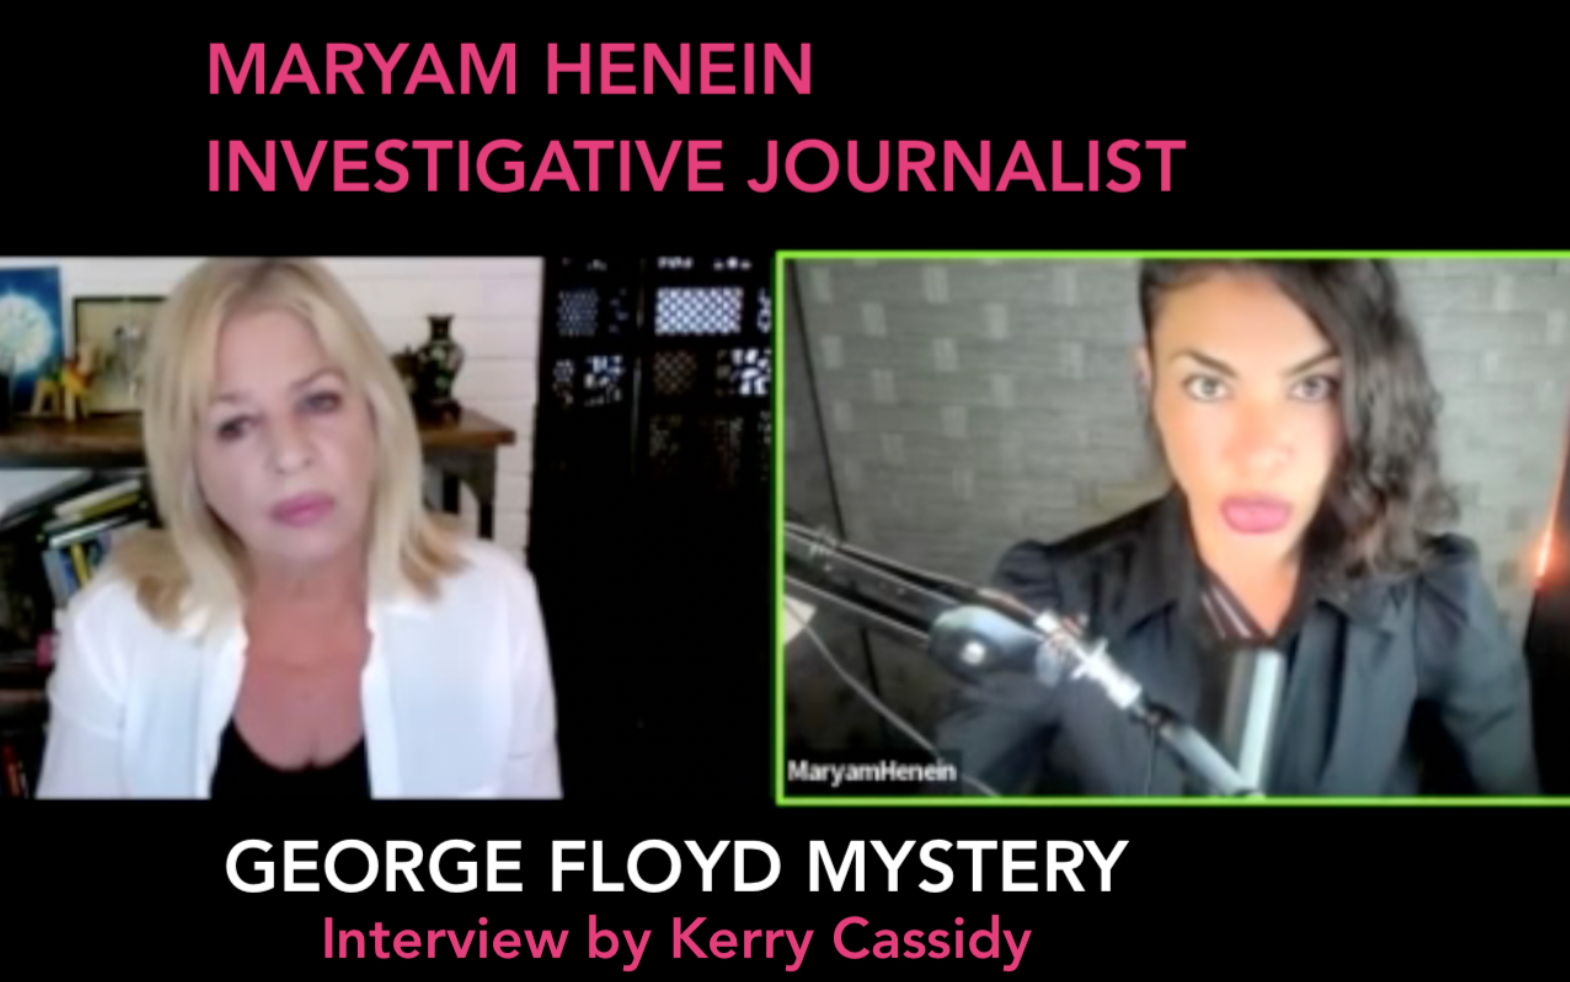 Update The Floyd Mystery with Kerry Kassidy and Maryam Henein Image